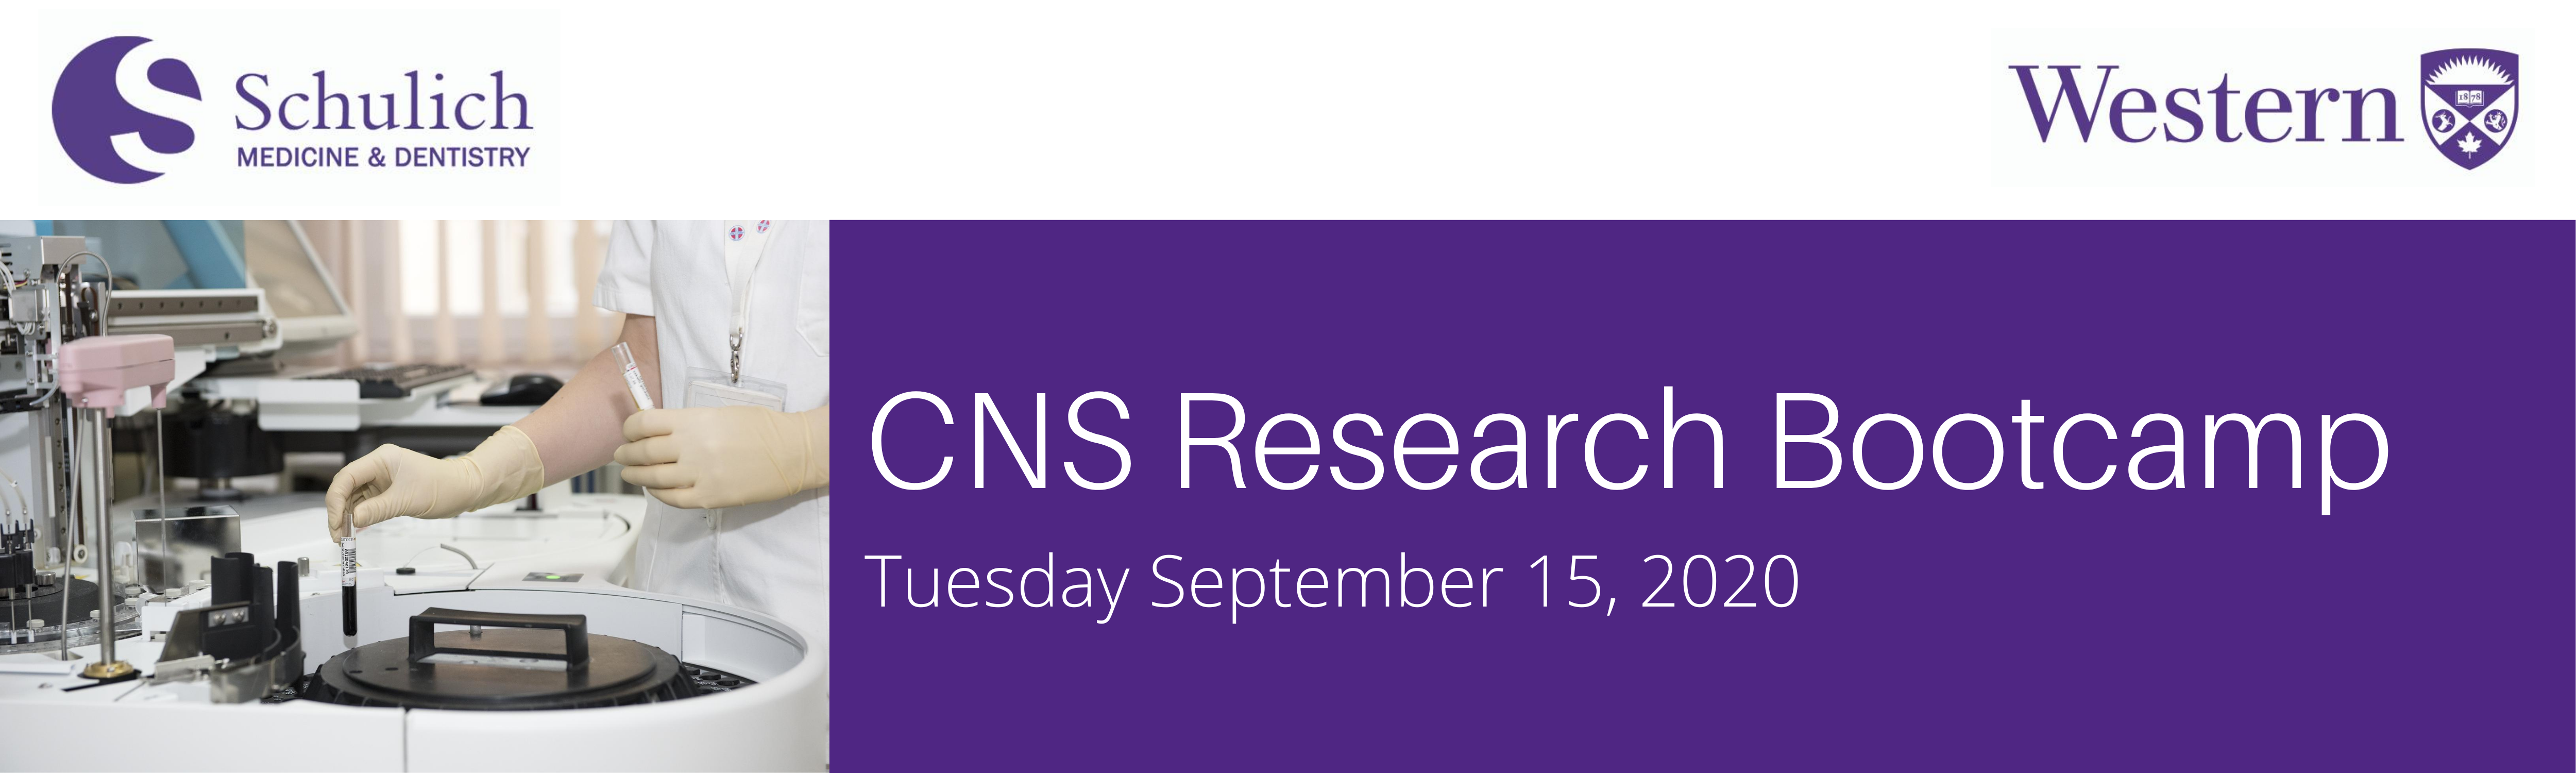 cns research